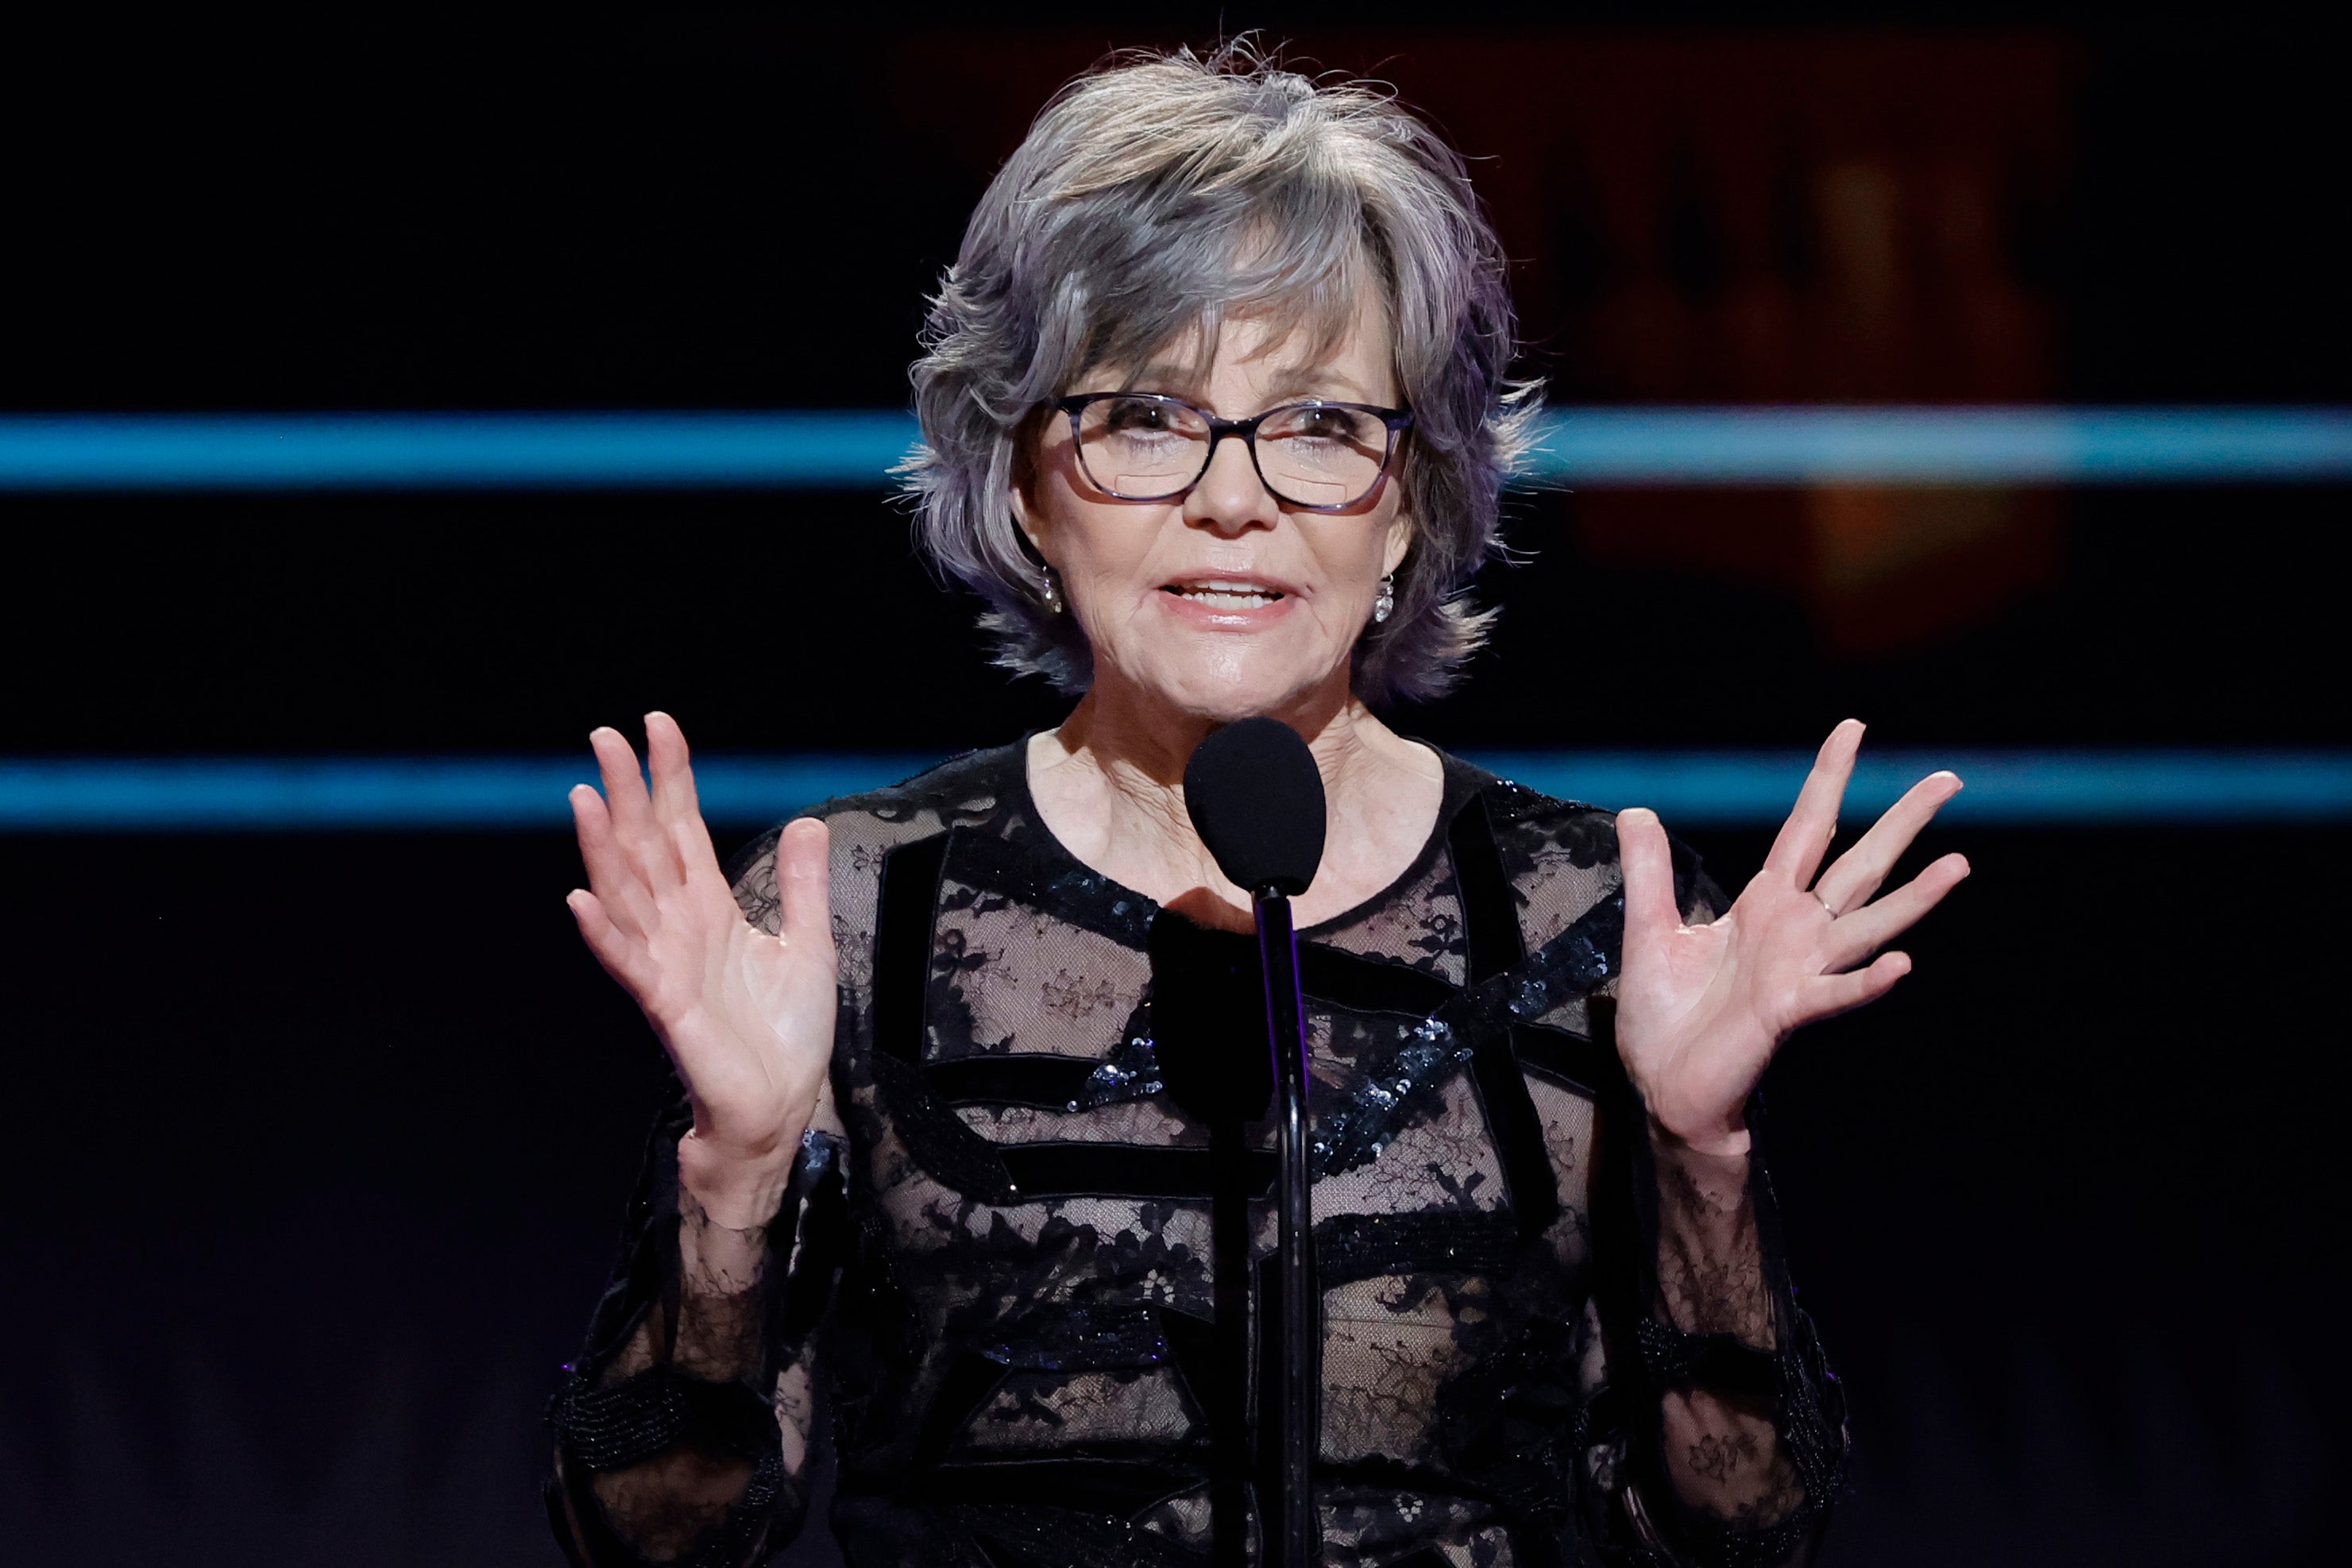 Actress Sally Field calls out her ‘white girl’ privilege during awards speech — and leftists slobber over her: ‘We love to see it!’